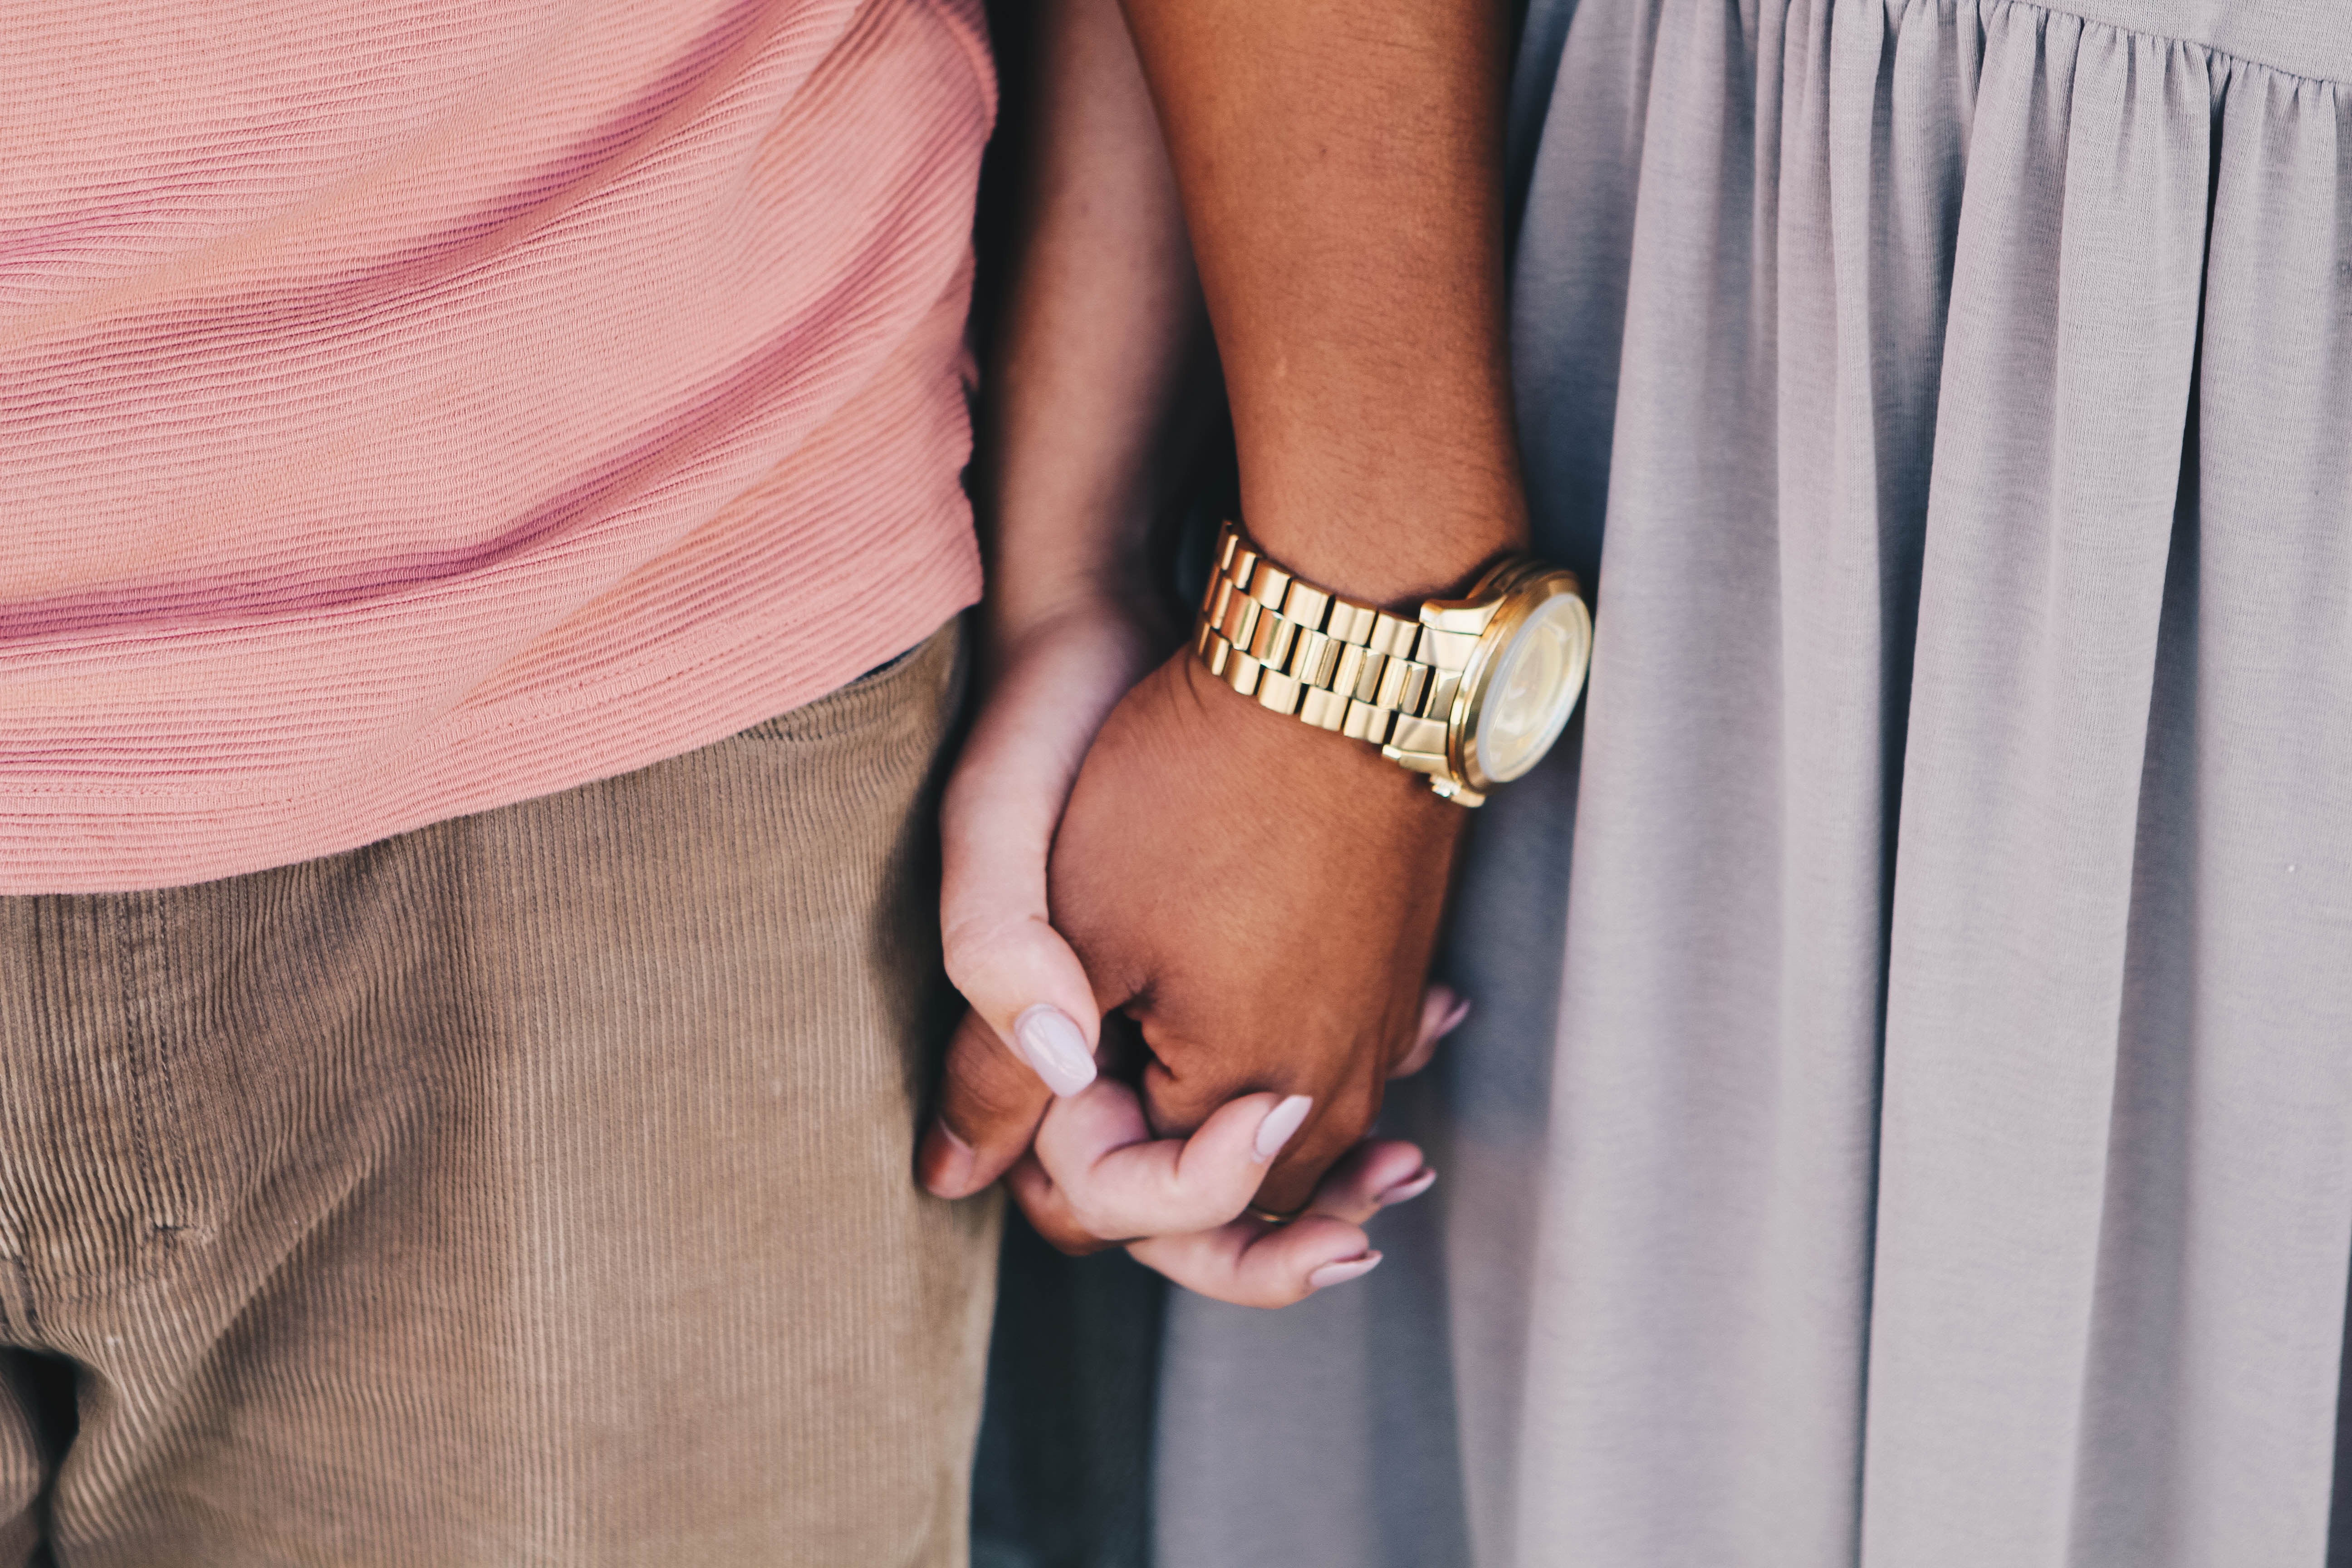 4 Daily Practices to Strengthen Your Relationship Learn 3